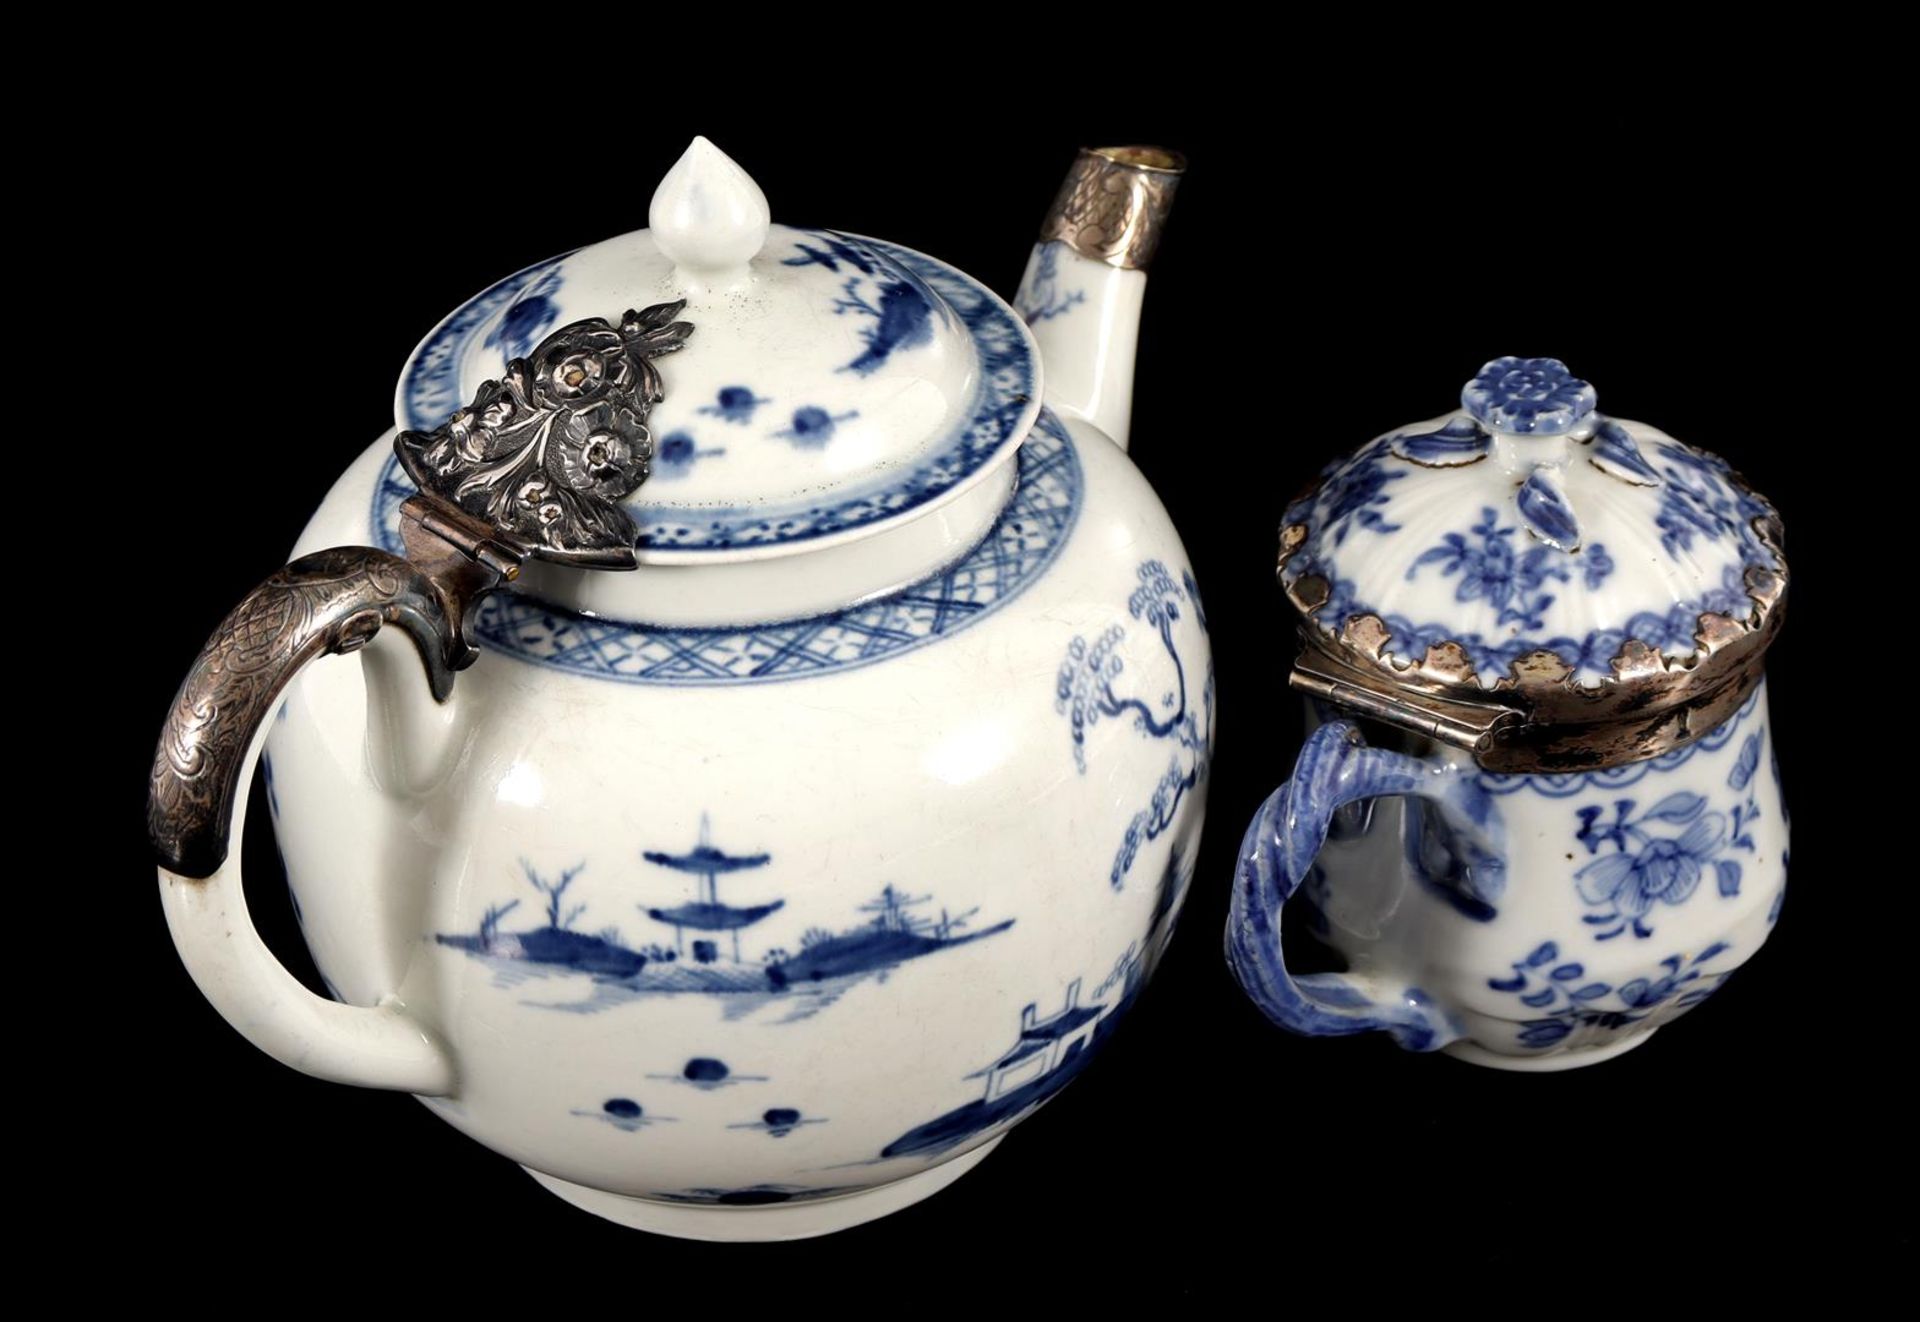 Worcester 18th century porcelain teapot - Image 2 of 2